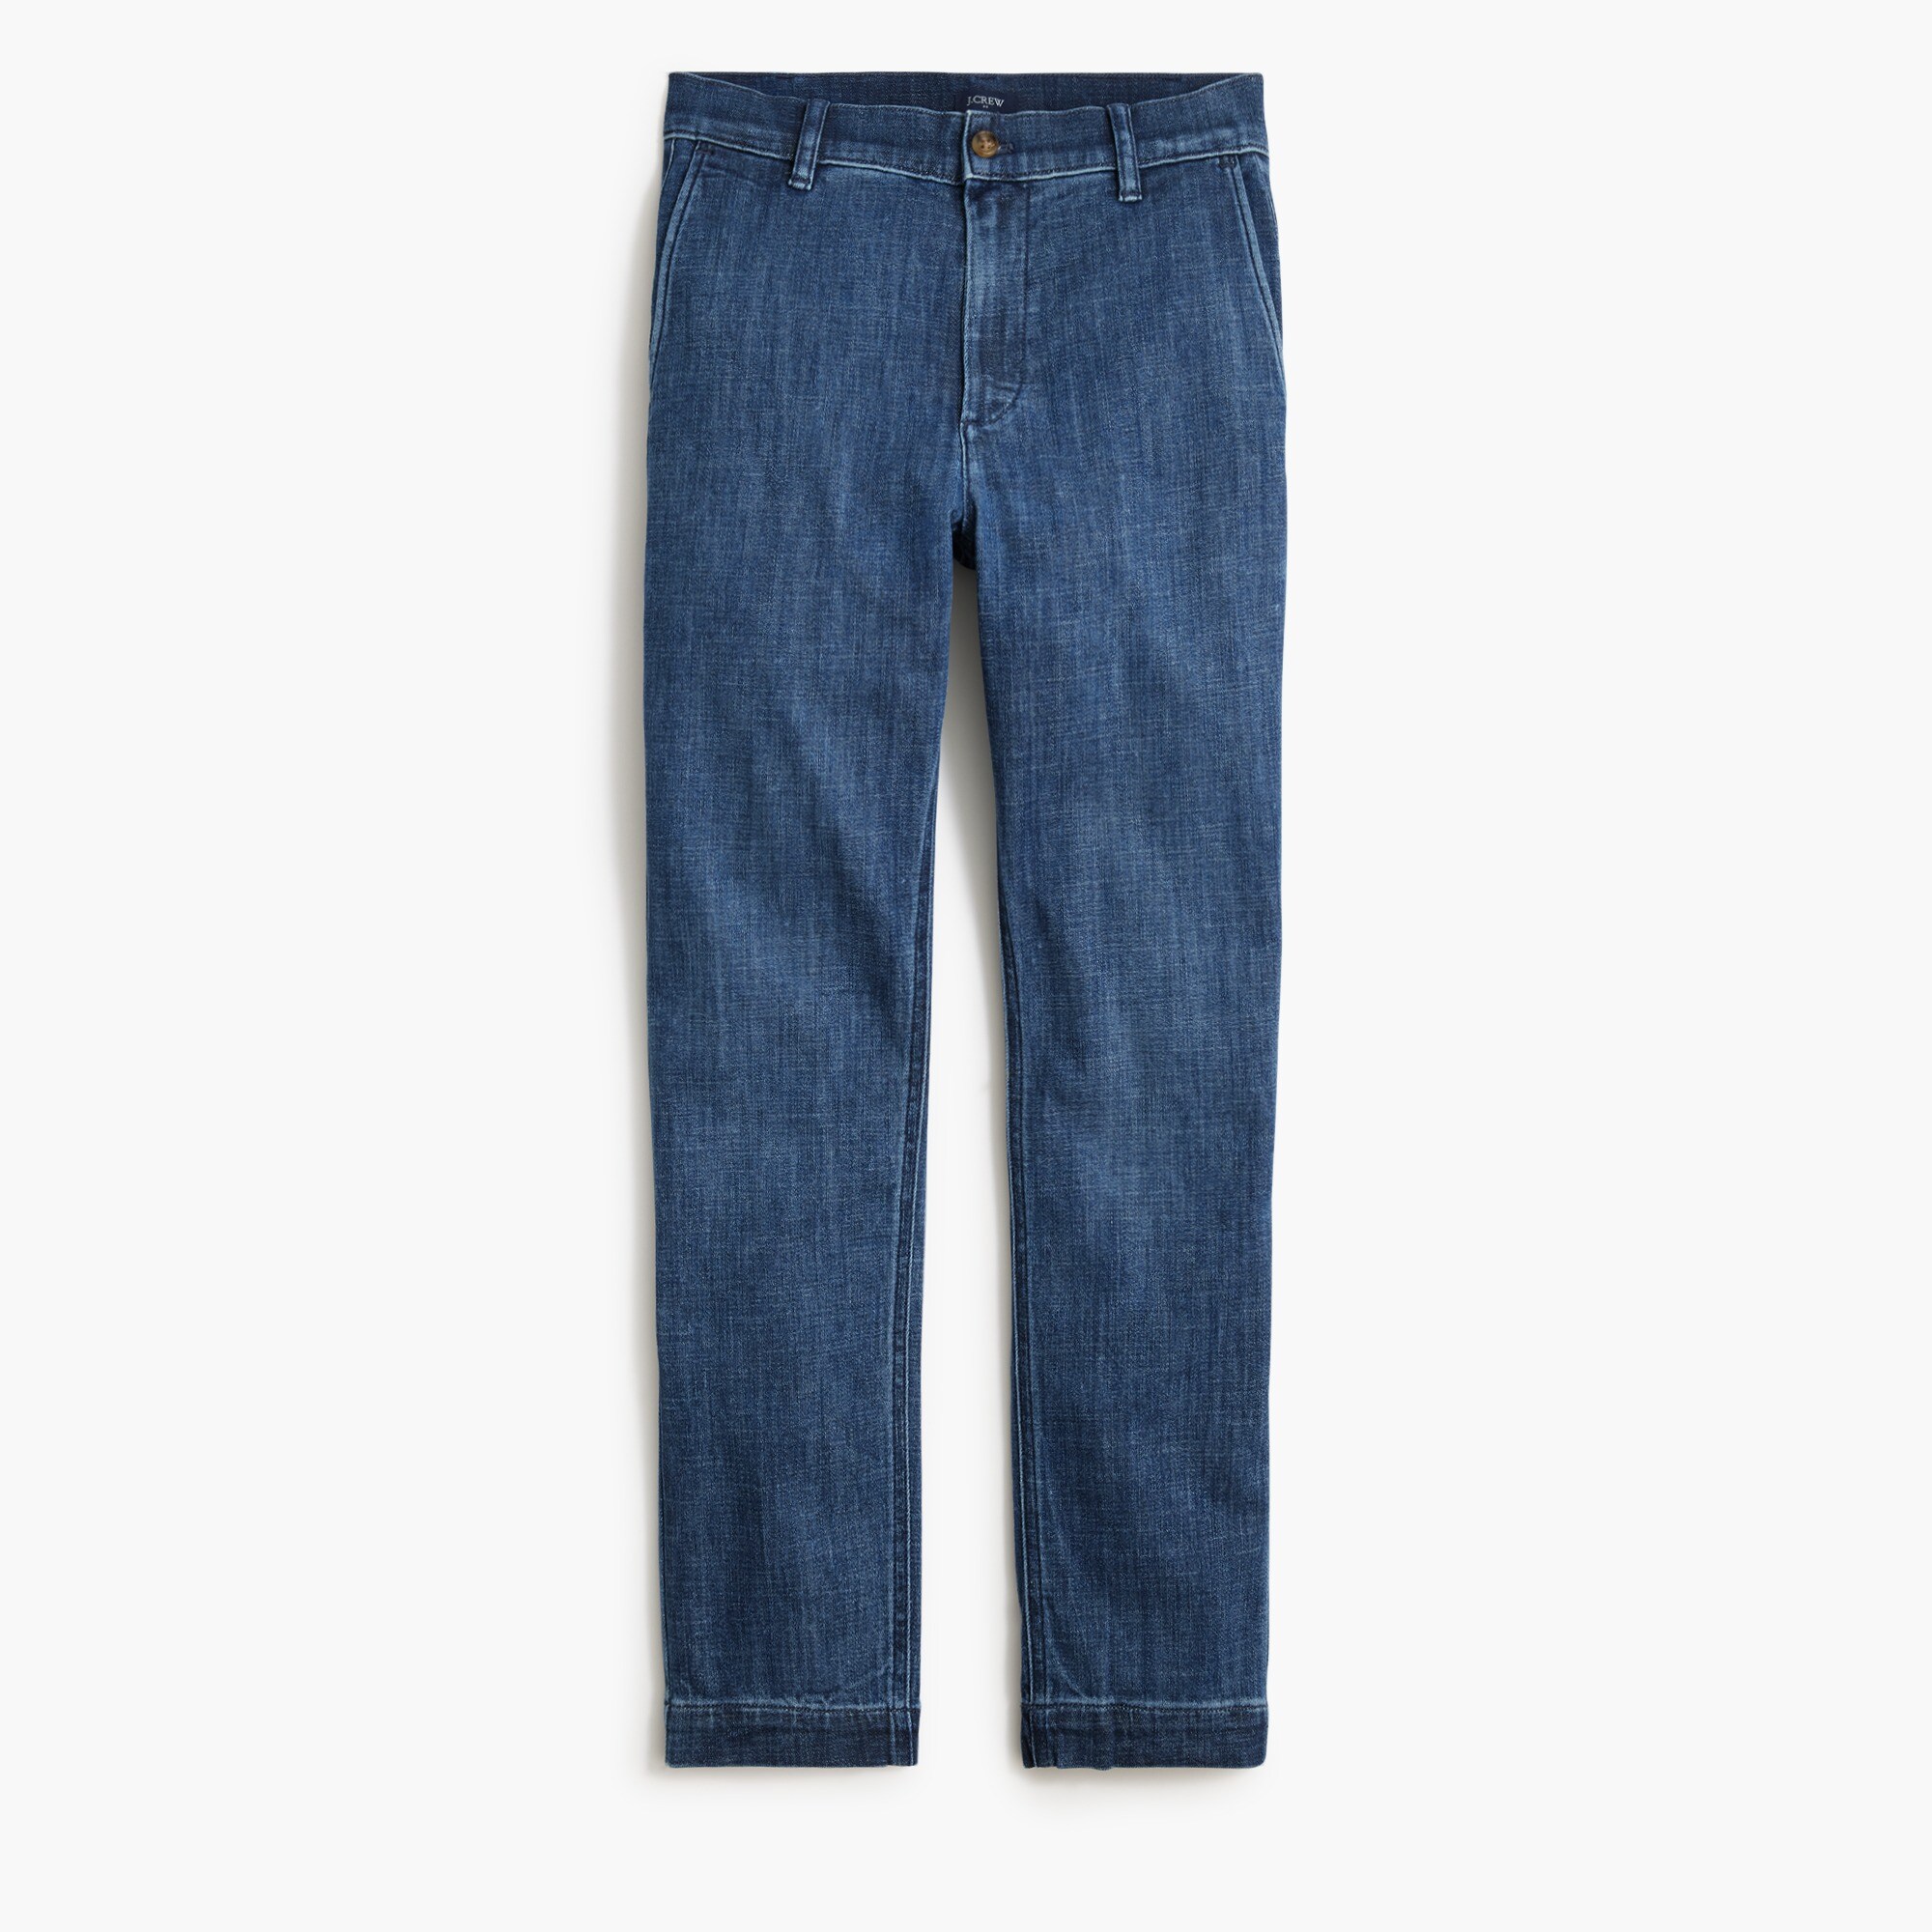  Denim chino pant in all-day stretch